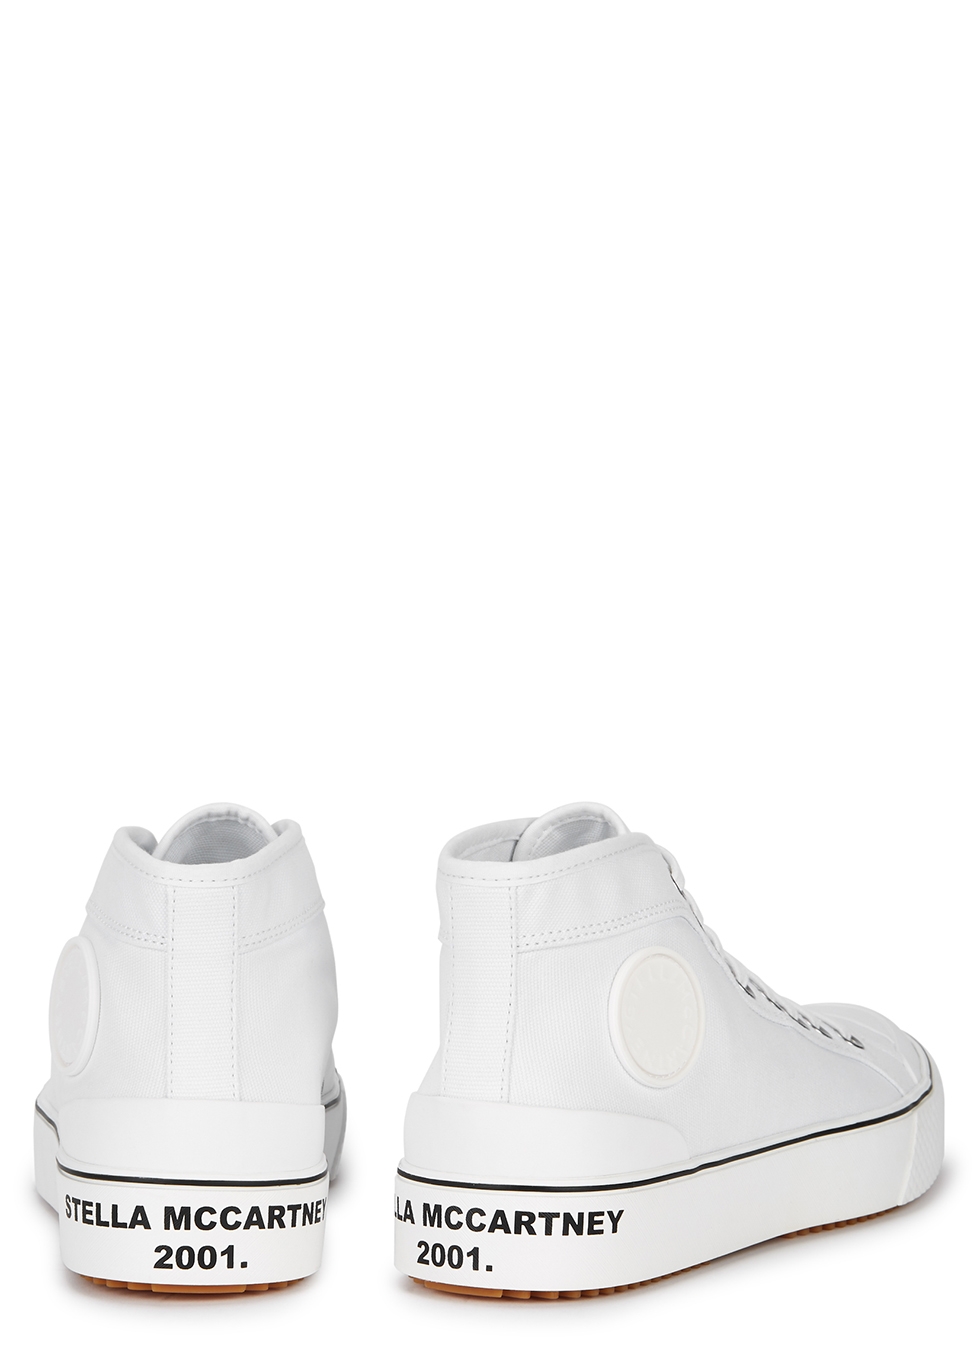 white canvas sports shoes